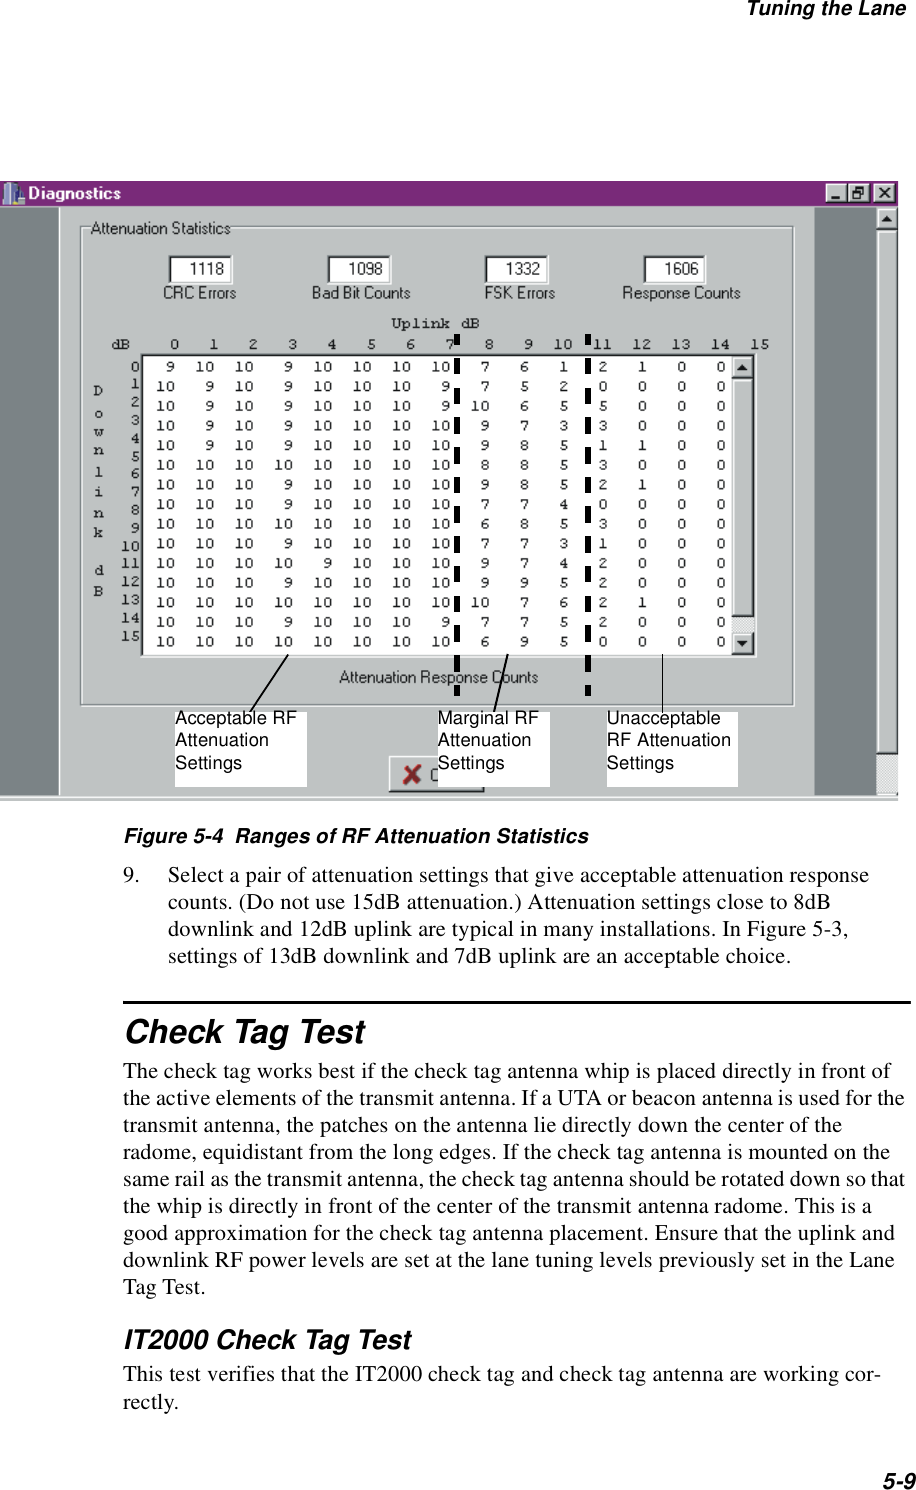 Tuning the Lane5-9Figure 5-4  Ranges of RF Attenuation Statistics9. Select a pair of attenuation settings that give acceptable attenuation response counts. (Do not use 15dB attenuation.) Attenuation settings close to 8dB downlink and 12dB uplink are typical in many installations. In Figure 5-3, settings of 13dB downlink and 7dB uplink are an acceptable choice.Check Tag TestThe check tag works best if the check tag antenna whip is placed directly in front of the active elements of the transmit antenna. If a UTA or beacon antenna is used for the transmit antenna, the patches on the antenna lie directly down the center of the radome, equidistant from the long edges. If the check tag antenna is mounted on the same rail as the transmit antenna, the check tag antenna should be rotated down so that the whip is directly in front of the center of the transmit antenna radome. This is a good approximation for the check tag antenna placement. Ensure that the uplink and downlink RF power levels are set at the lane tuning levels previously set in the Lane Tag Test.IT2000 Check Tag TestThis test verifies that the IT2000 check tag and check tag antenna are working cor-rectly.Acceptable RFAttenuationSettingsMarginal RFAttenuationSettingsUnacceptableRF AttenuationSettings